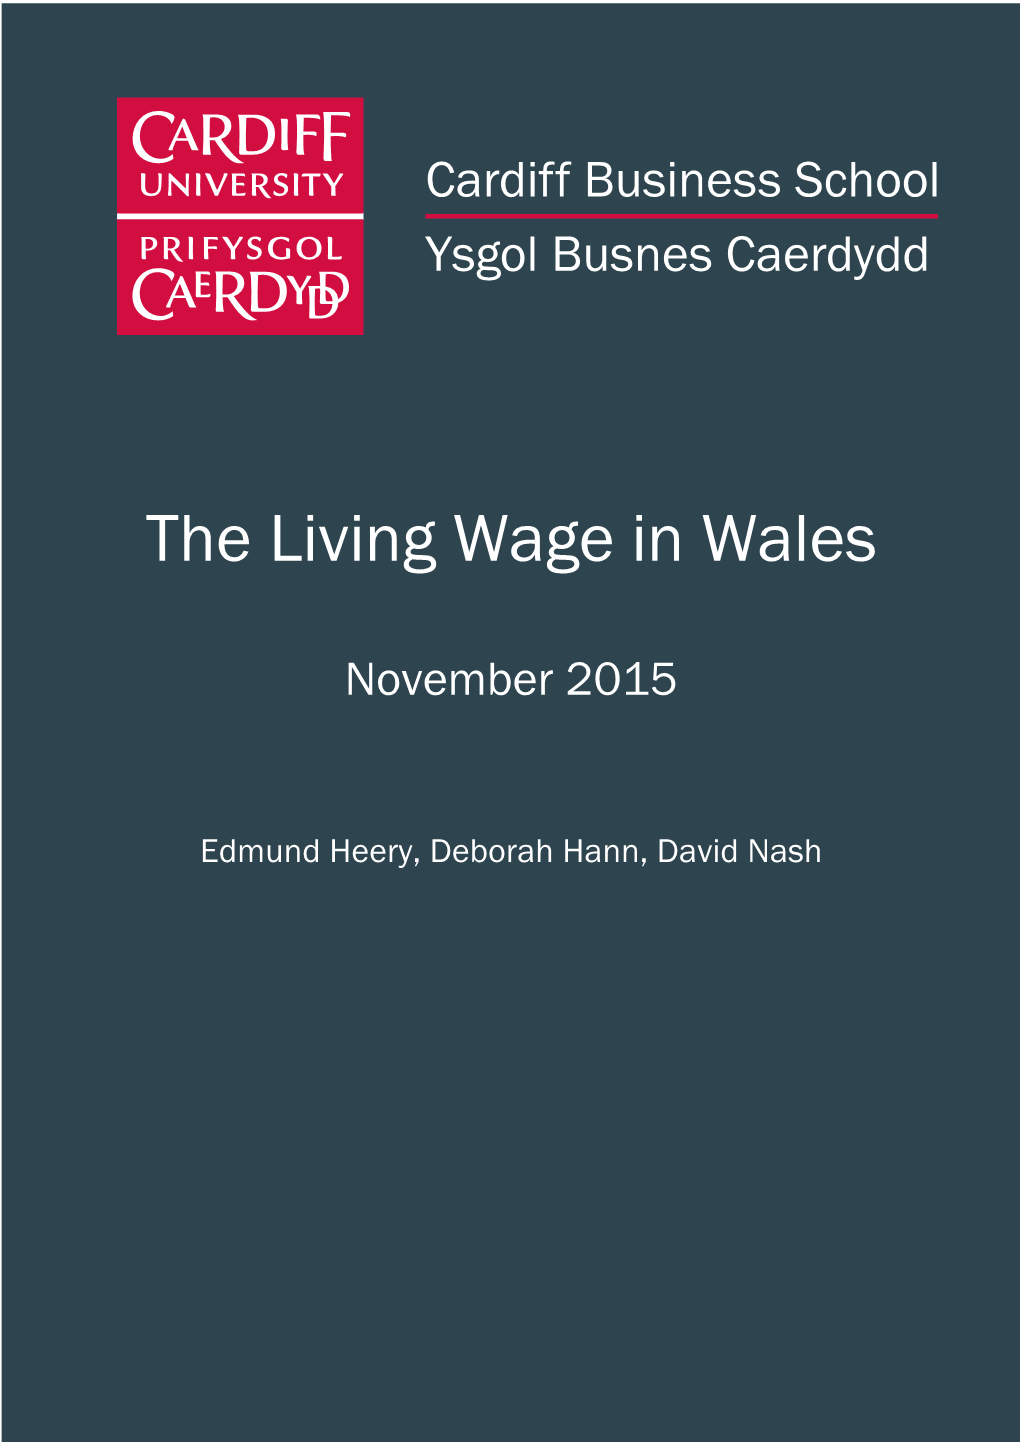 The Living Wage in Wales